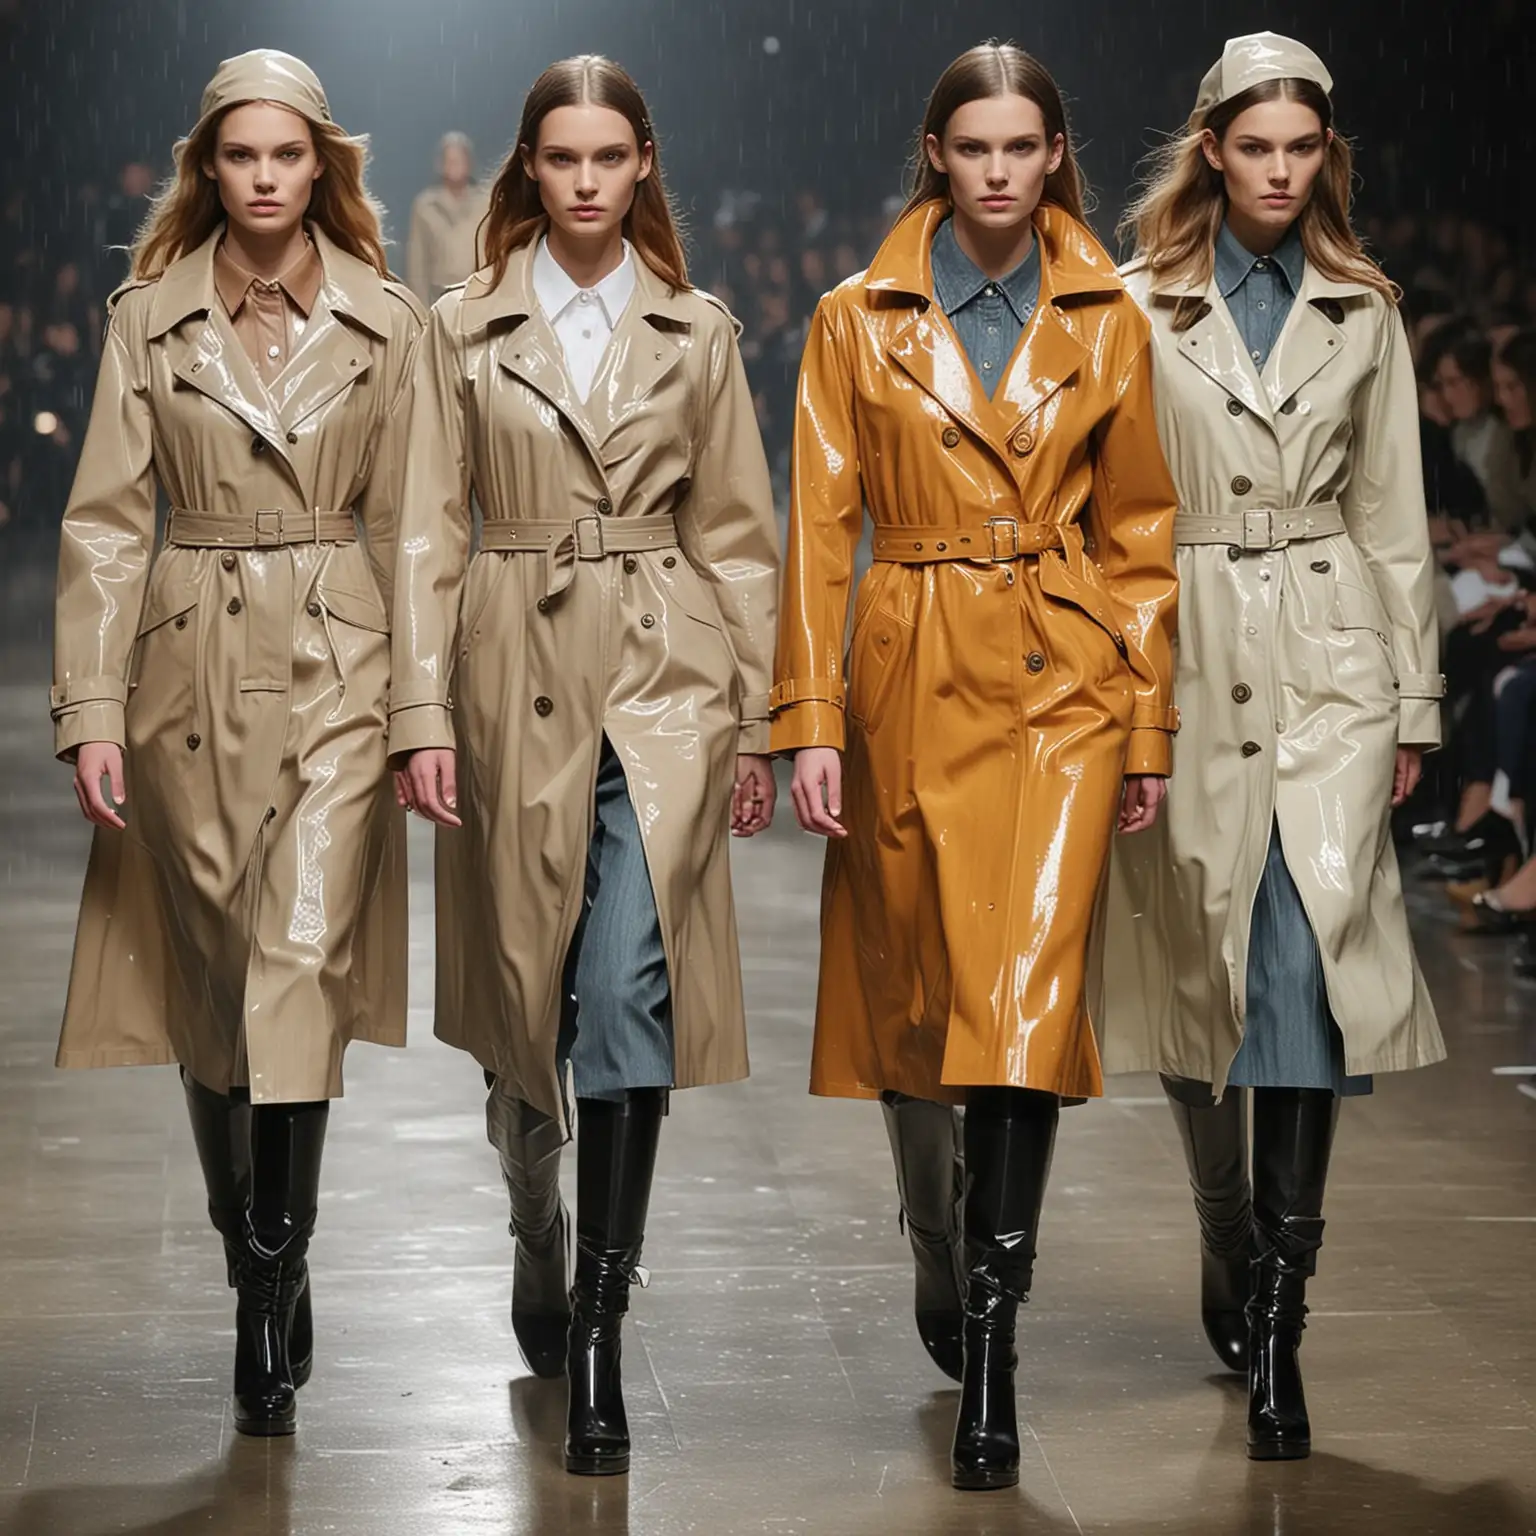 Generate  a runway fashion show  of a rain coats that are modern yet give vintage  aesthetic 